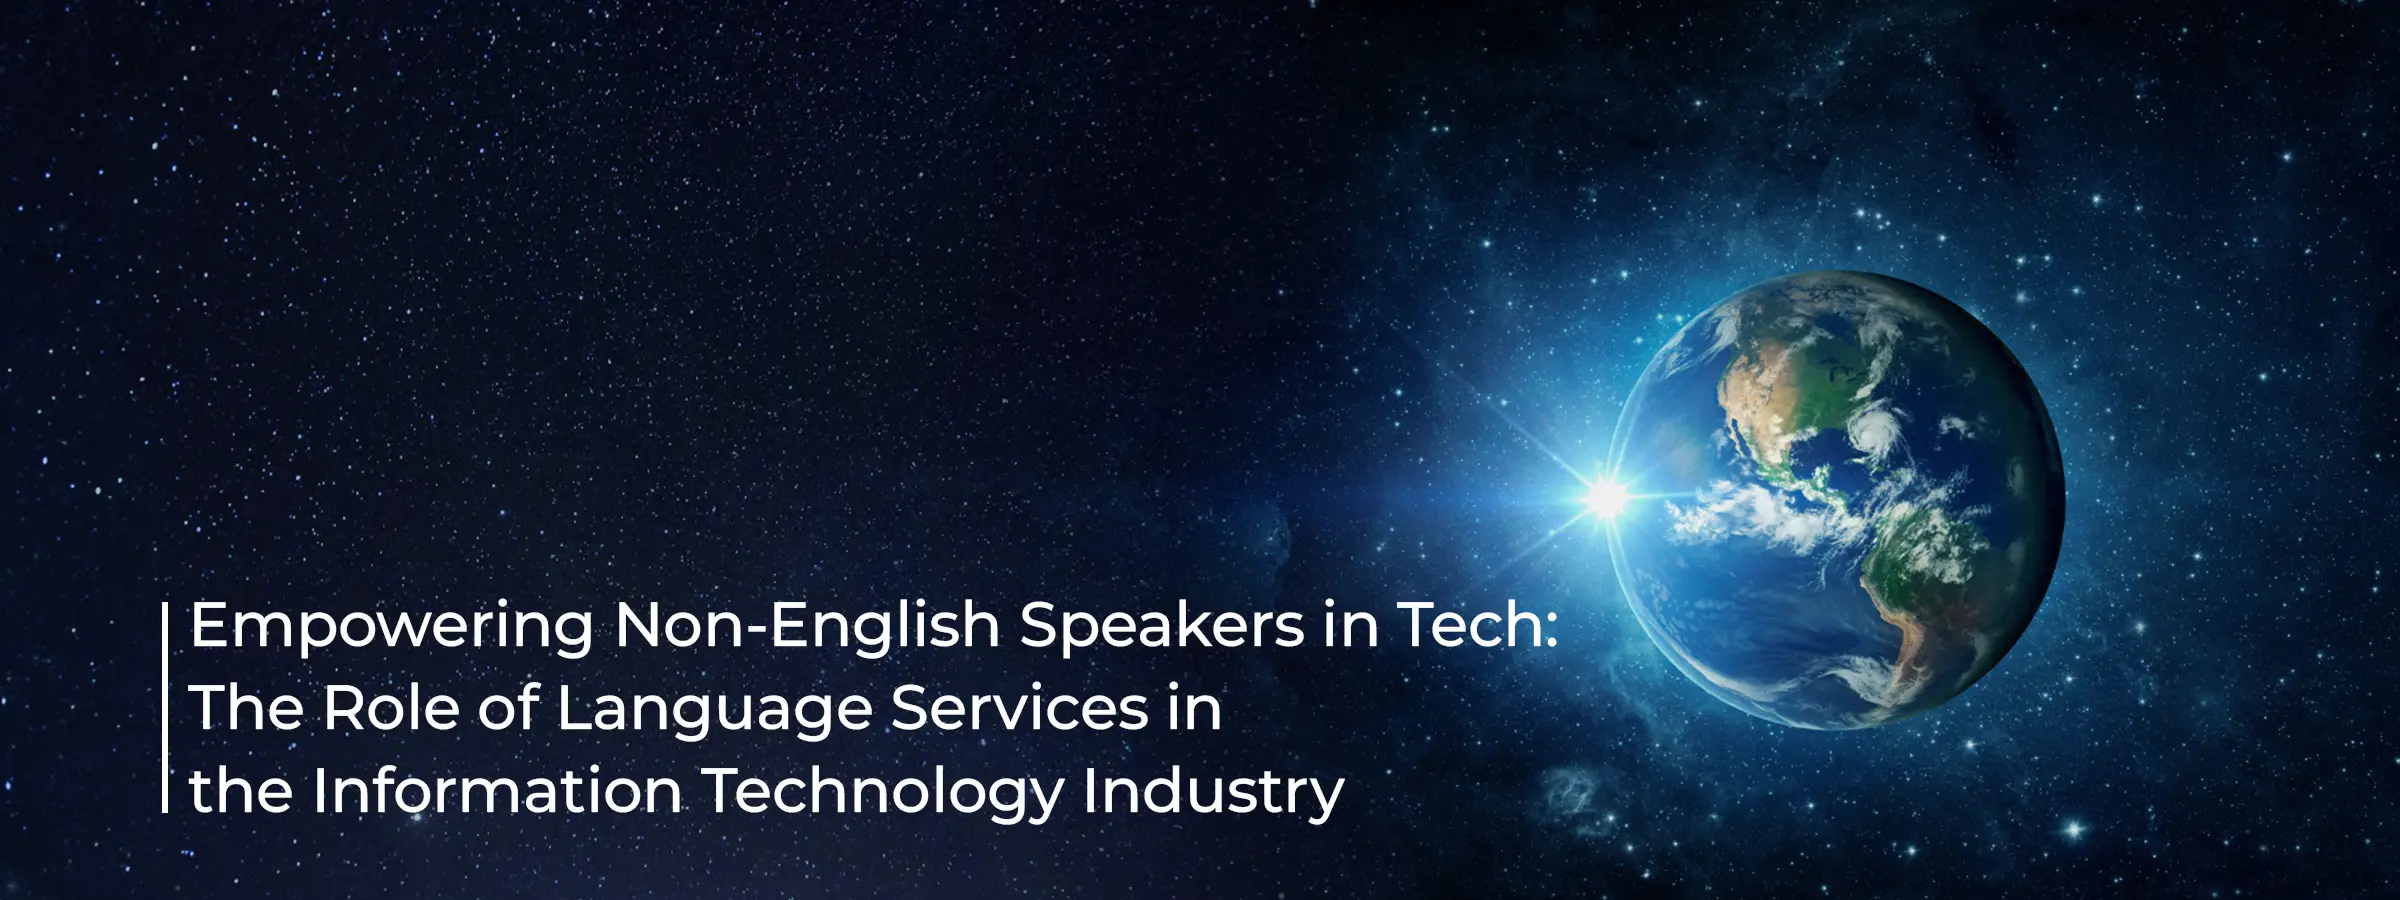 empowering-non-english-speakers-in-tech-the-role-of-language-services-in-the-information-technology-industry